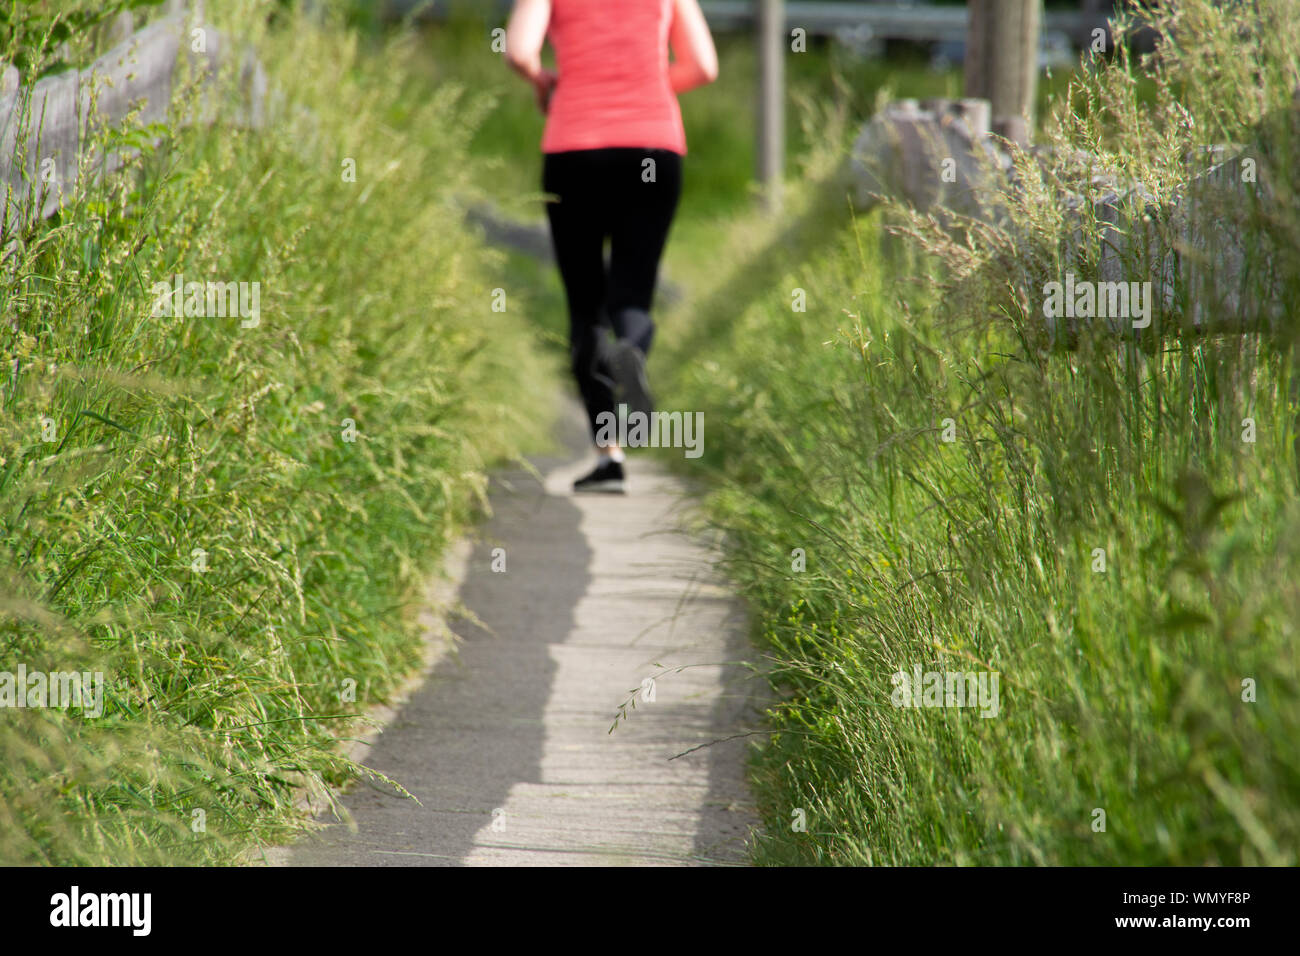 Fit woman runs along path in black leggings and pink top Stock Photo